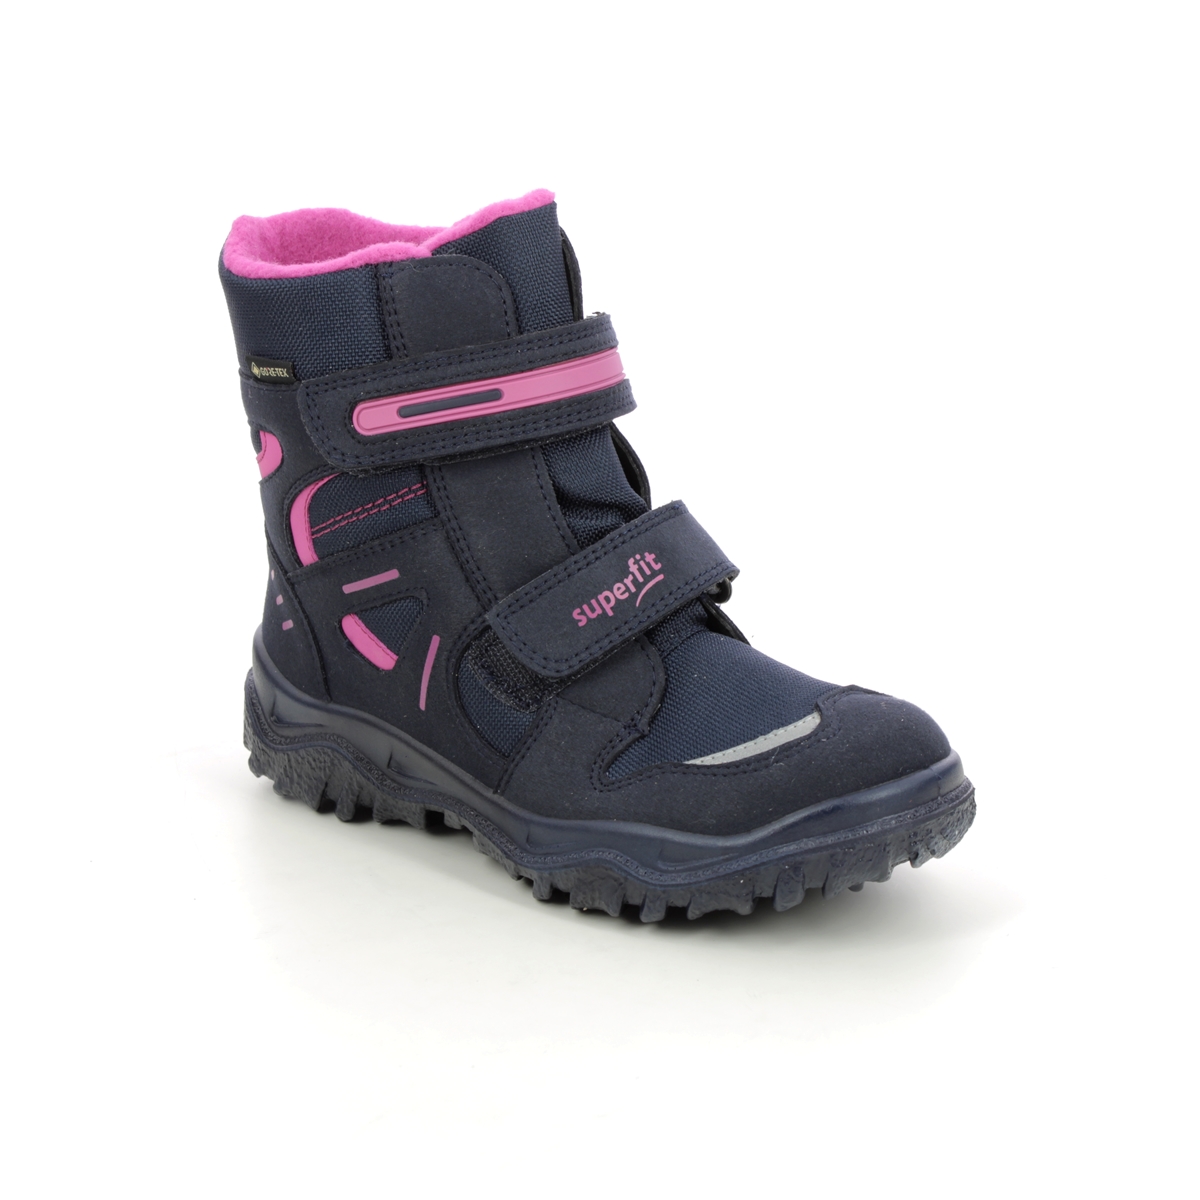 Superfit Husky Jnr Gore Navy Pink Kids Girls Boots 1809080-8020 In Size 29 In Plain Navy Pink For kids